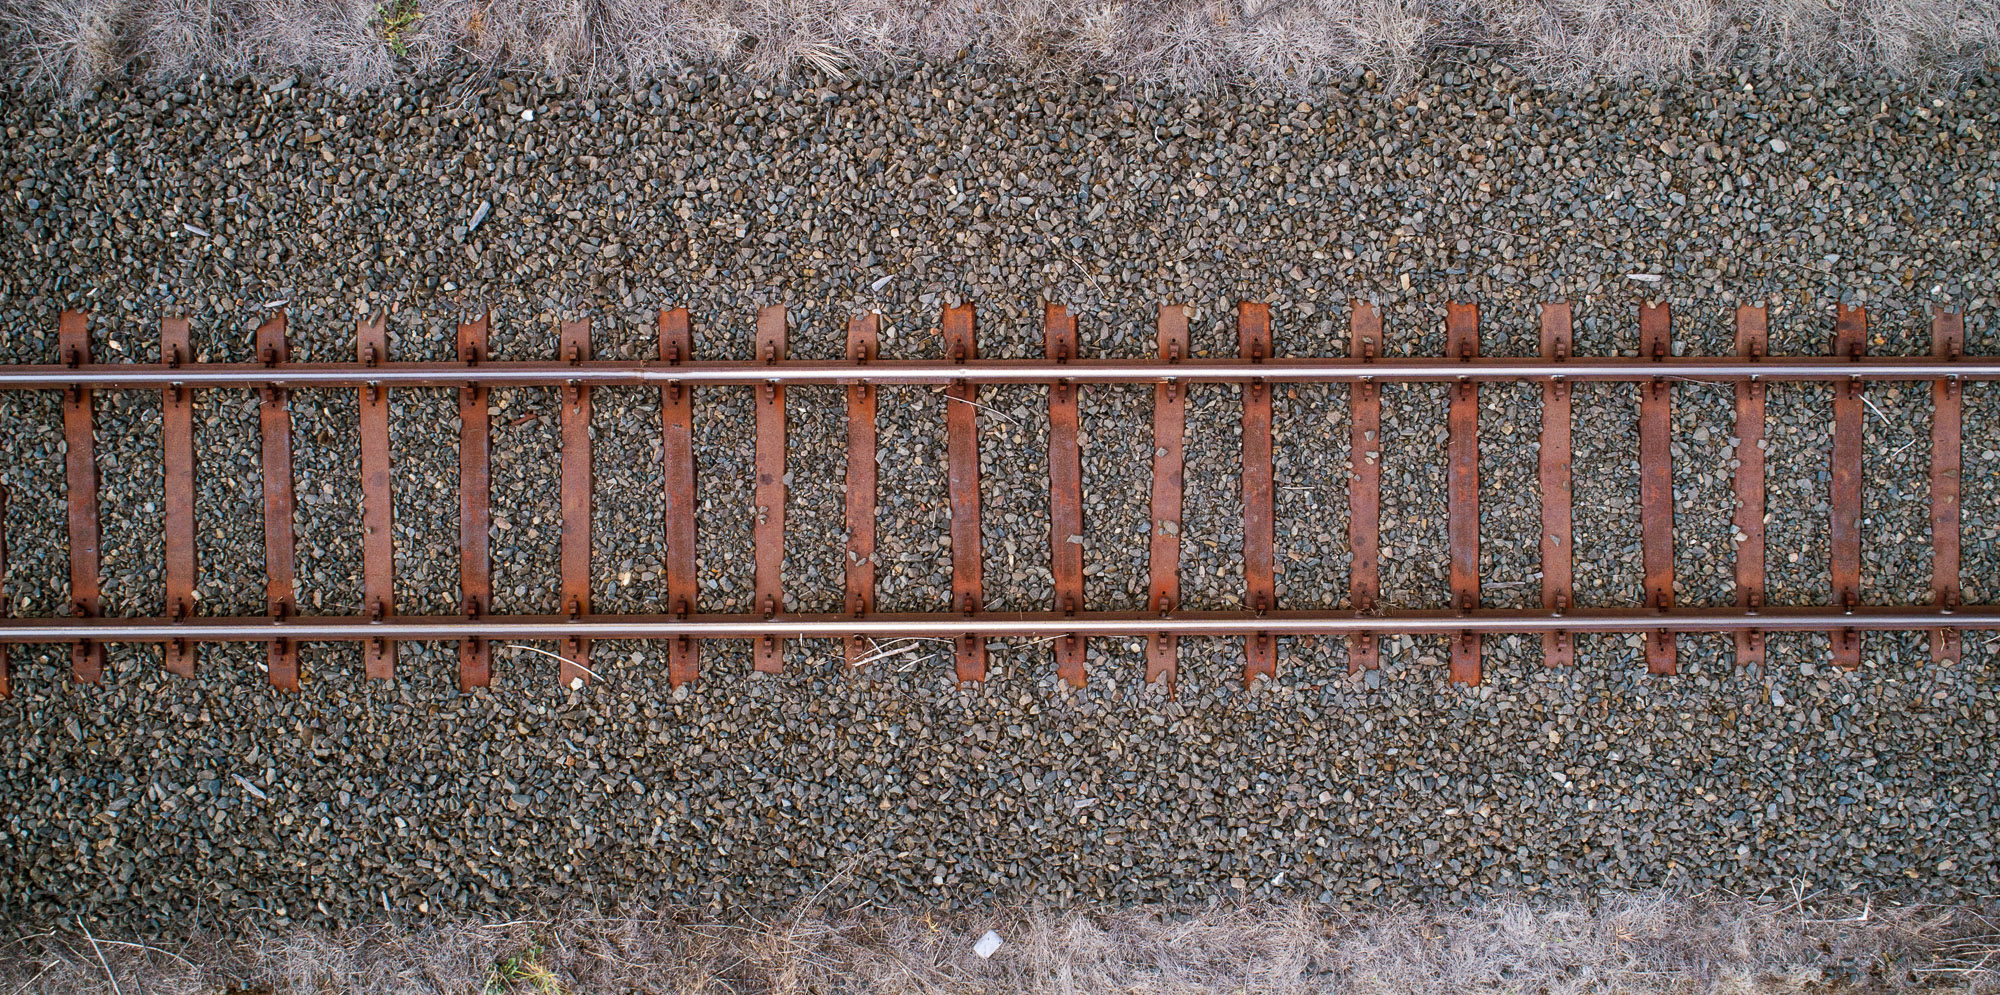 Aerial view of railroad track, Narromine to Narrabri, New South Wales.